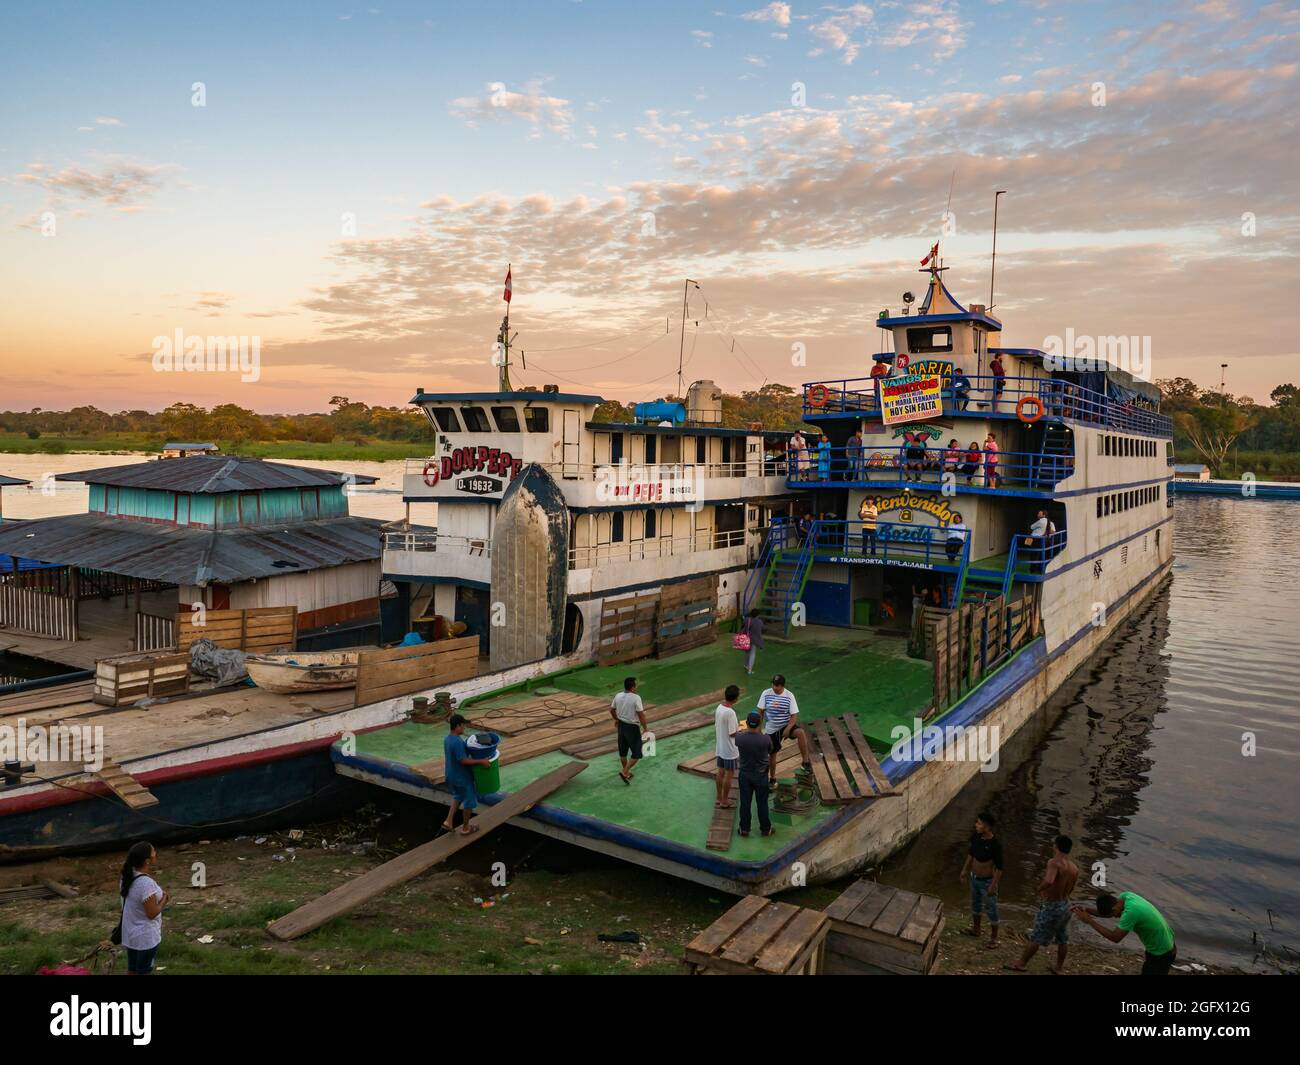 Santa Rosa, Peru - Mar 24, 2018: Sunrise over the Amazon river and the cargo boat waiting at the port. Stock Photo